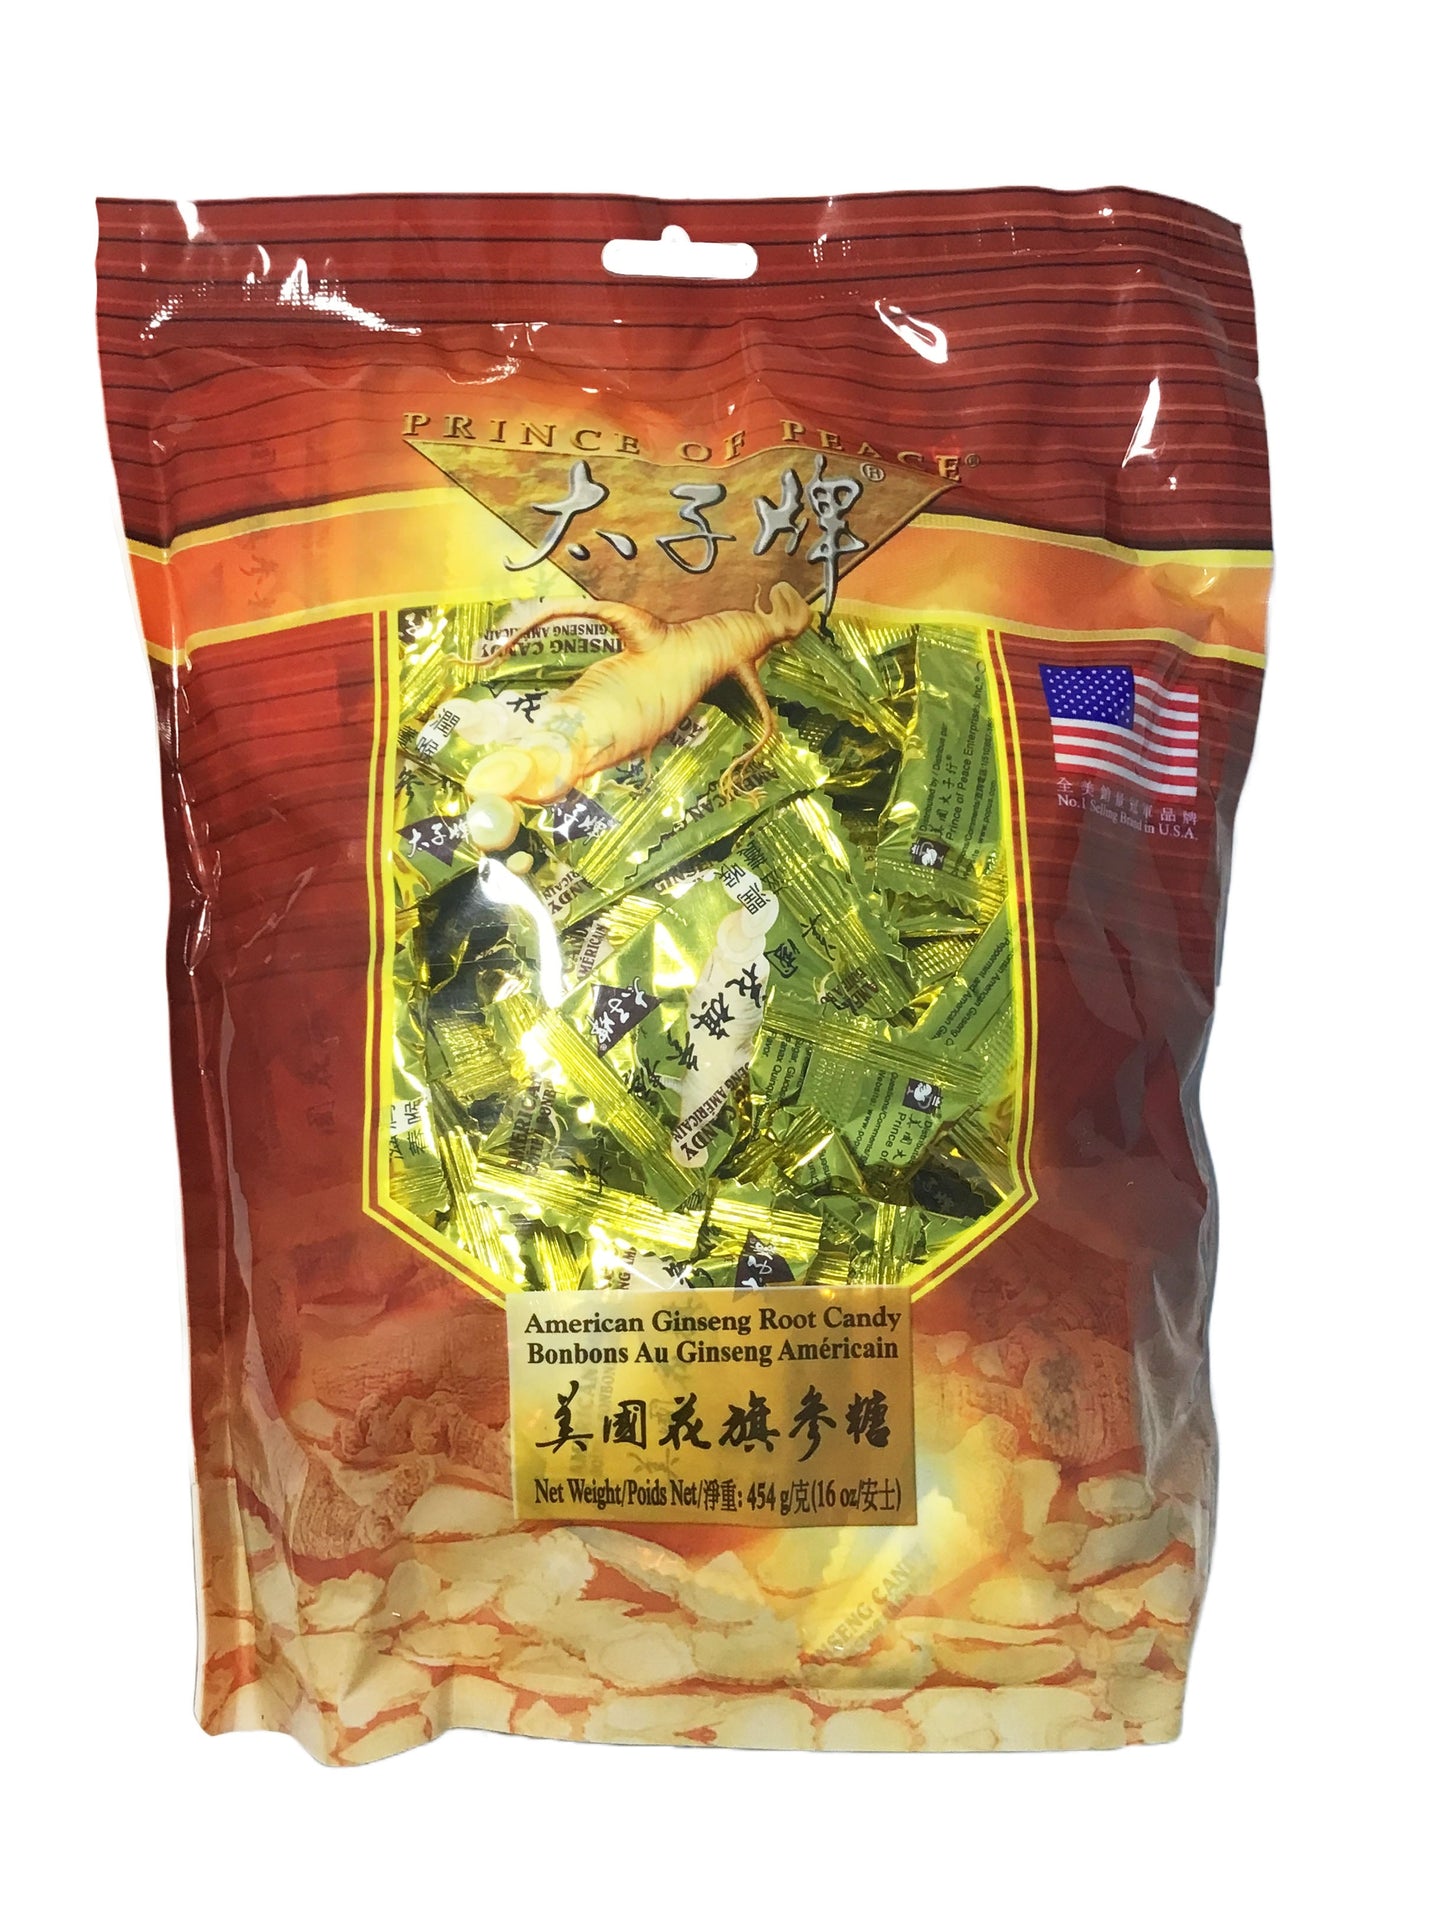 PRINCE OF PEACE American Ginseng Root Candy (454g) 16oz 太子牌 美国花旗参糖